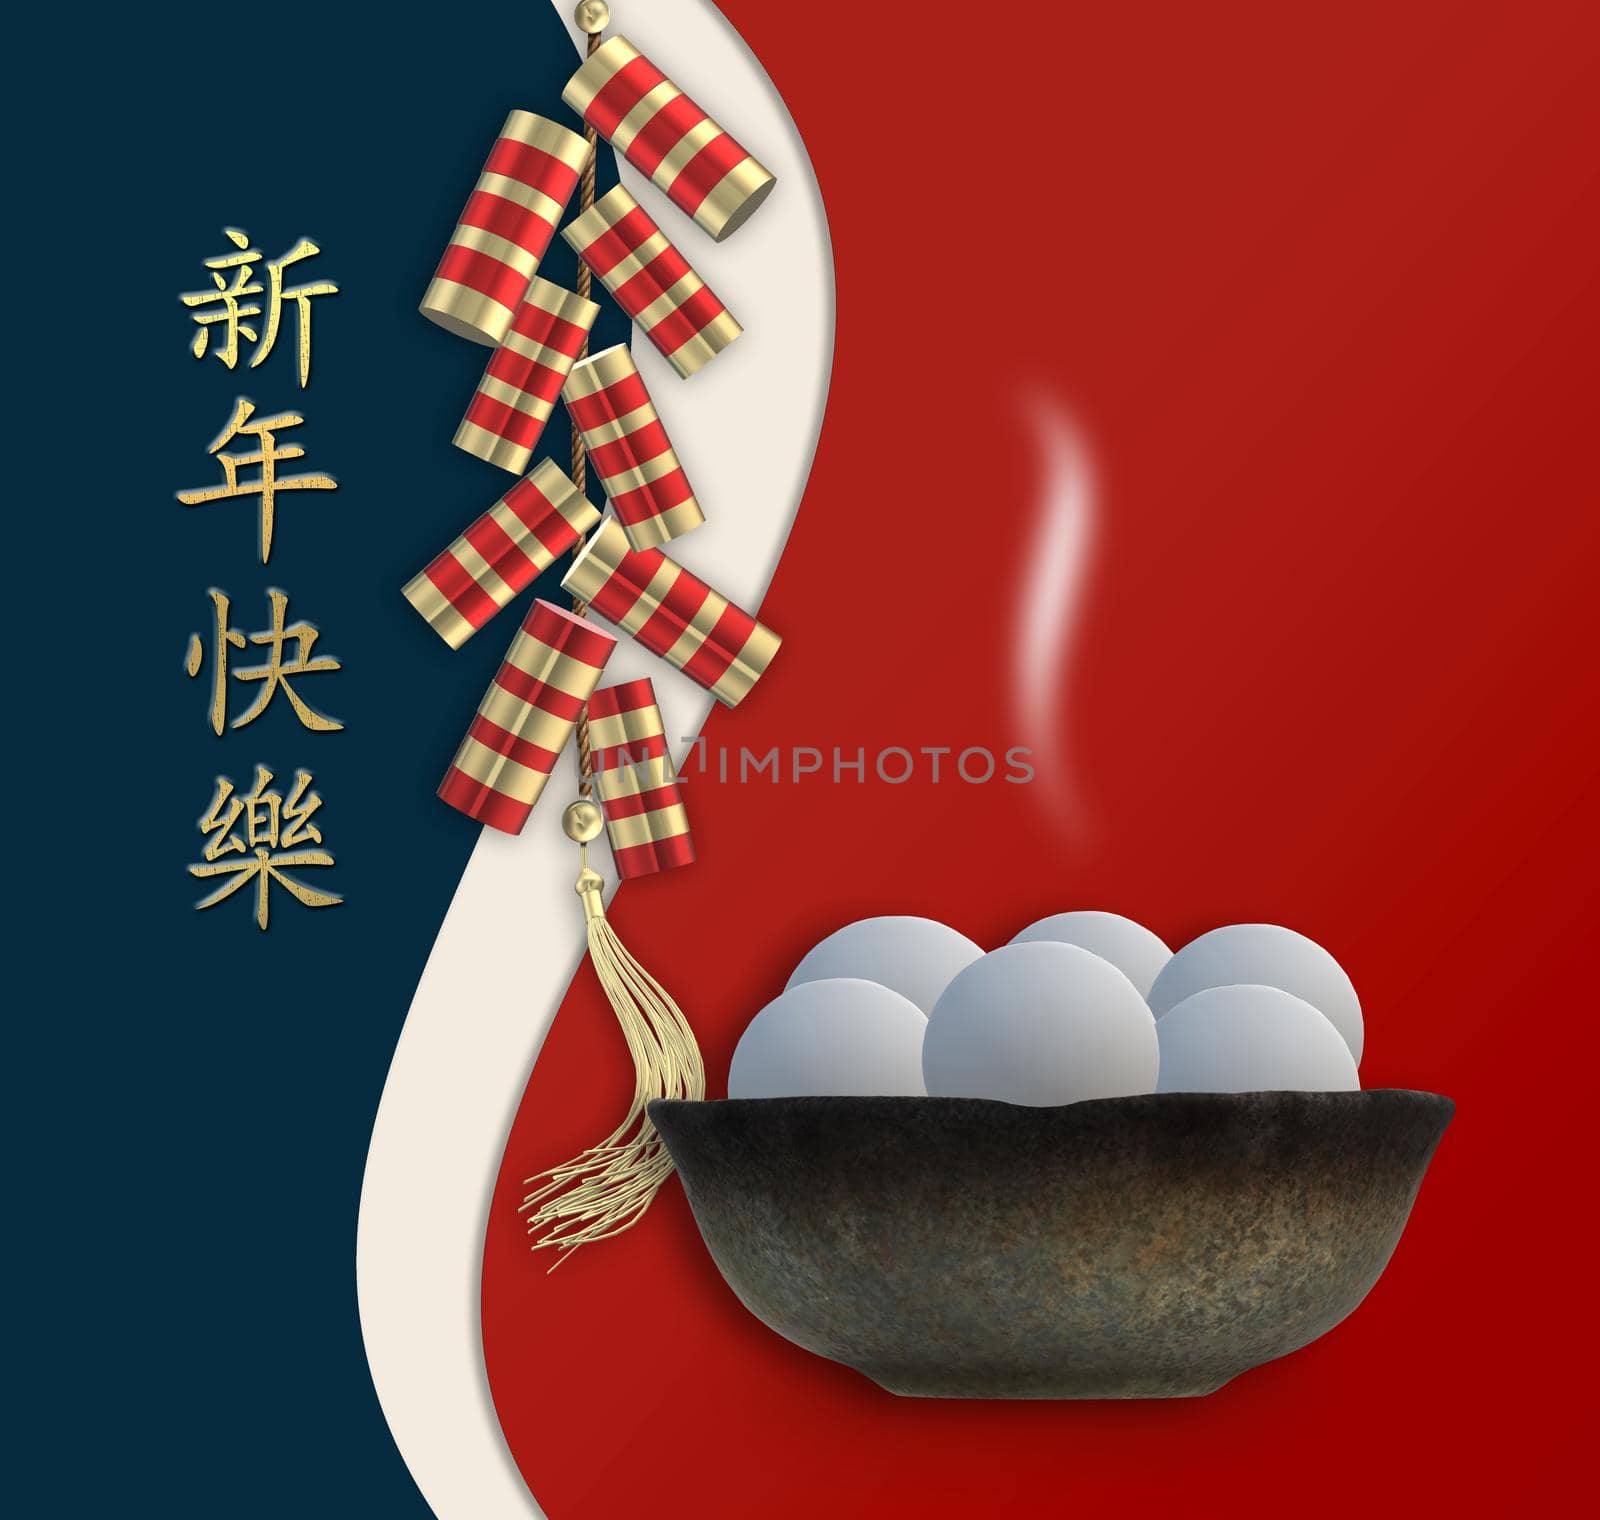 Chinese Lantern Festival. Chinese New Year Food dumplings in bowl, Asian crackers. Template for Chinese New Year Lantern festival celebration. Copy space, mock up. 3D illustration